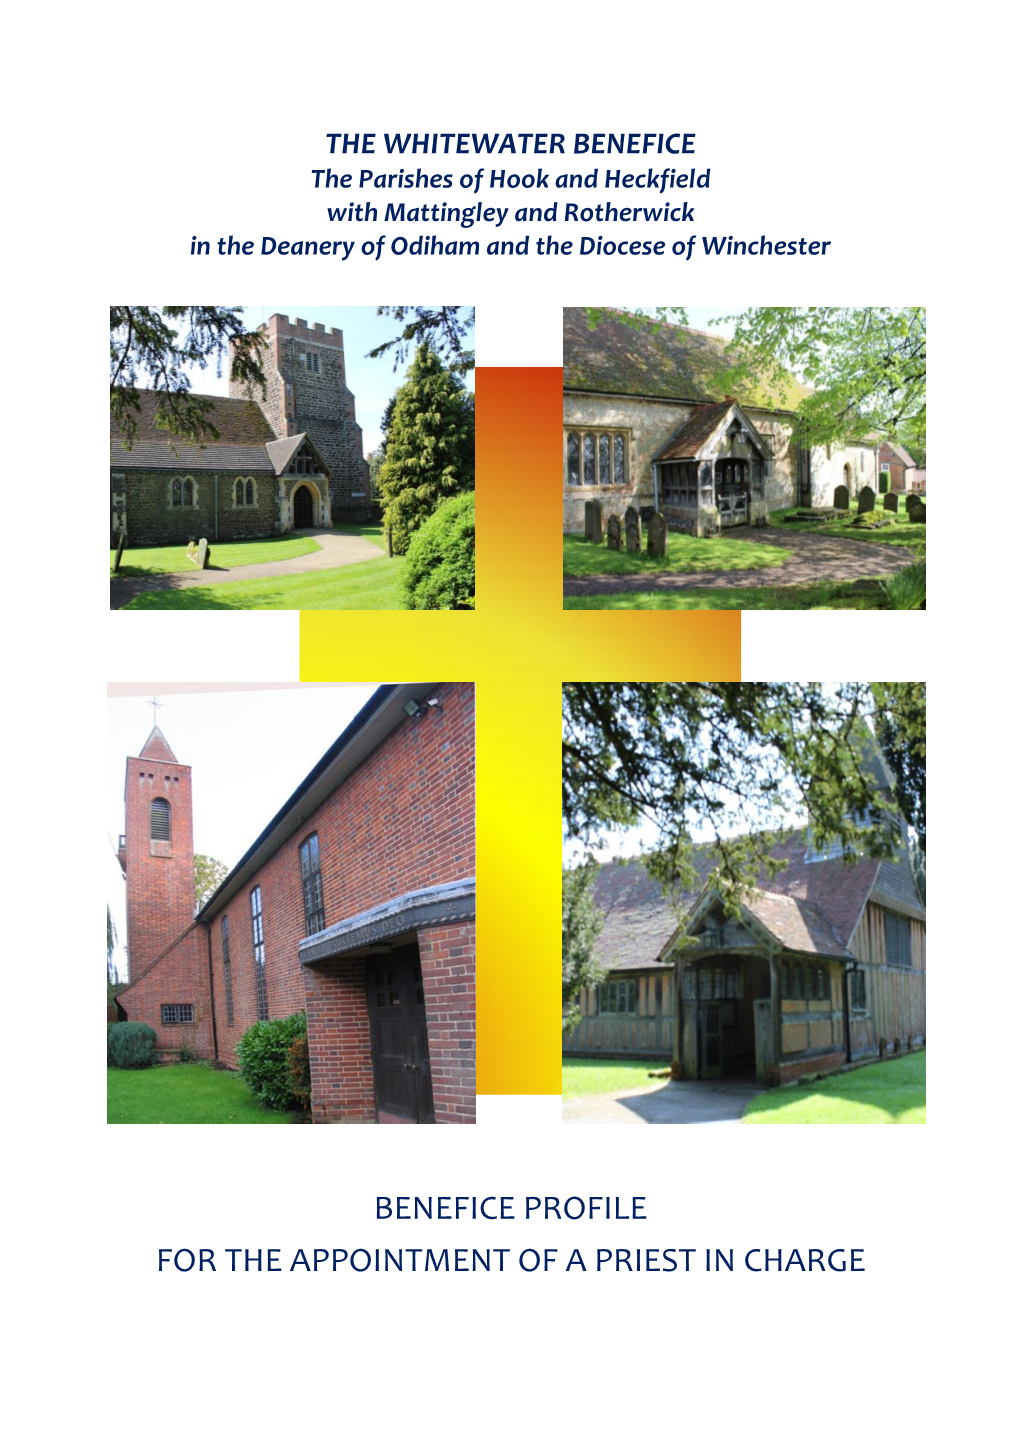 The Parishes of Hook and Heckfield with Mattingley and Rotherwick in the Deanery of Odiham and the Diocese of Winchester